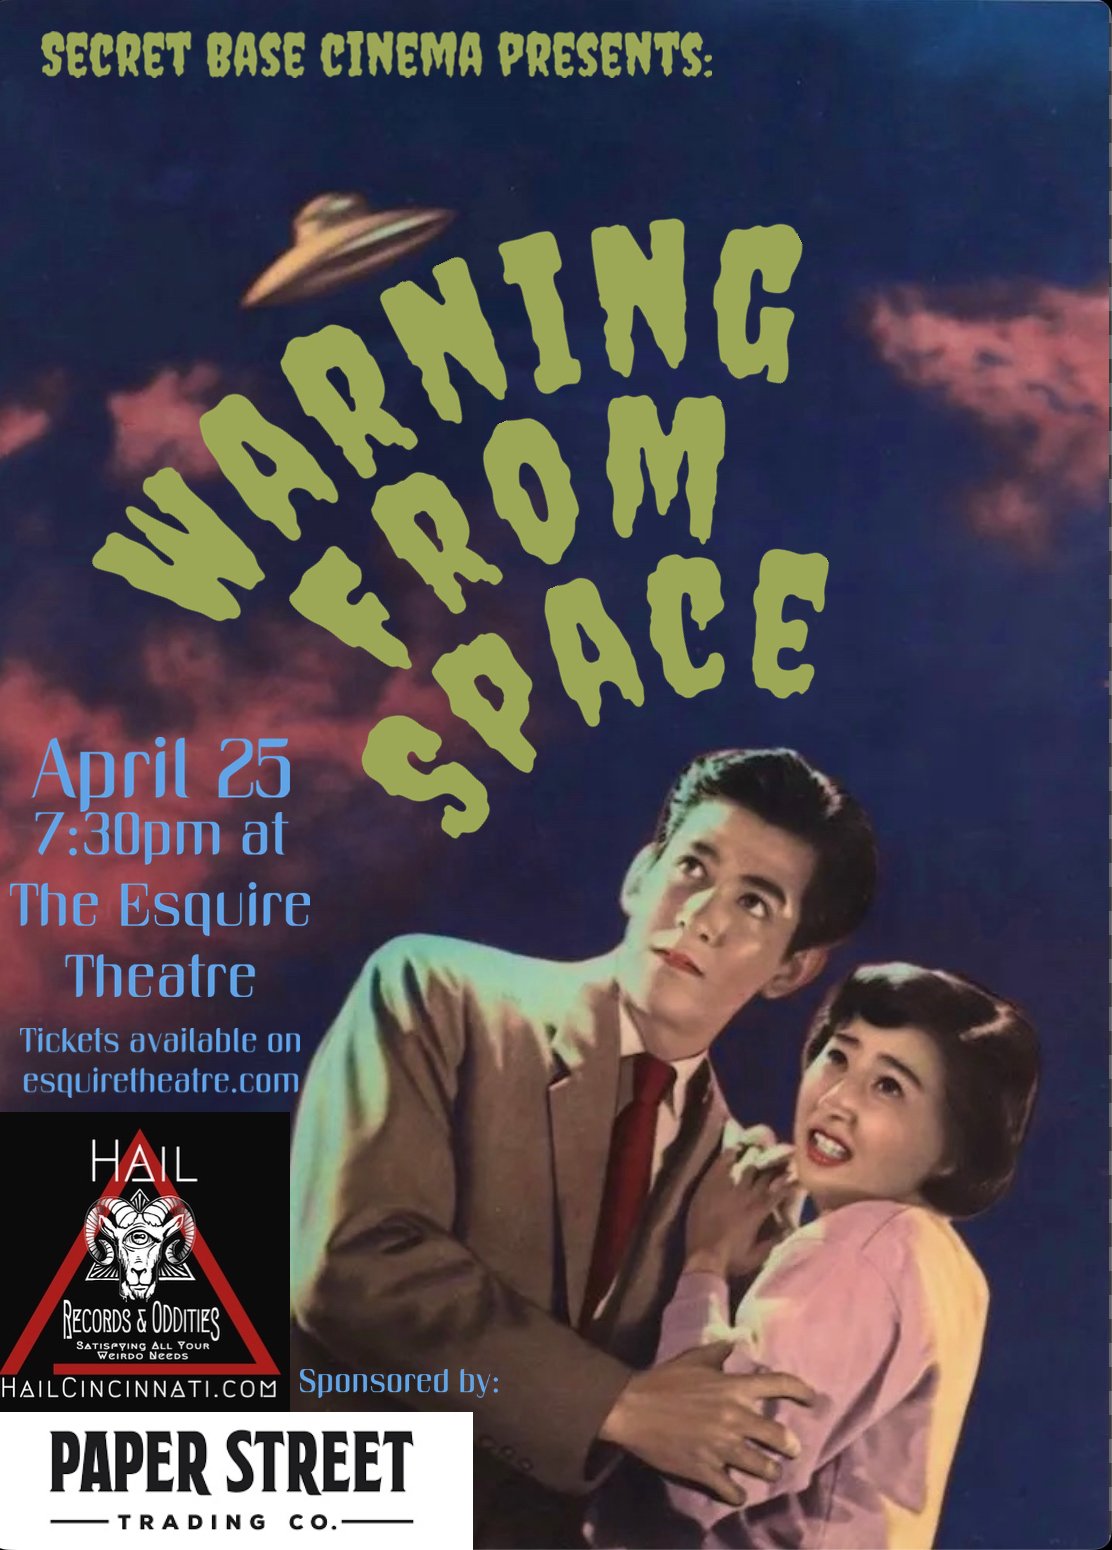 Warning From Space (1956)